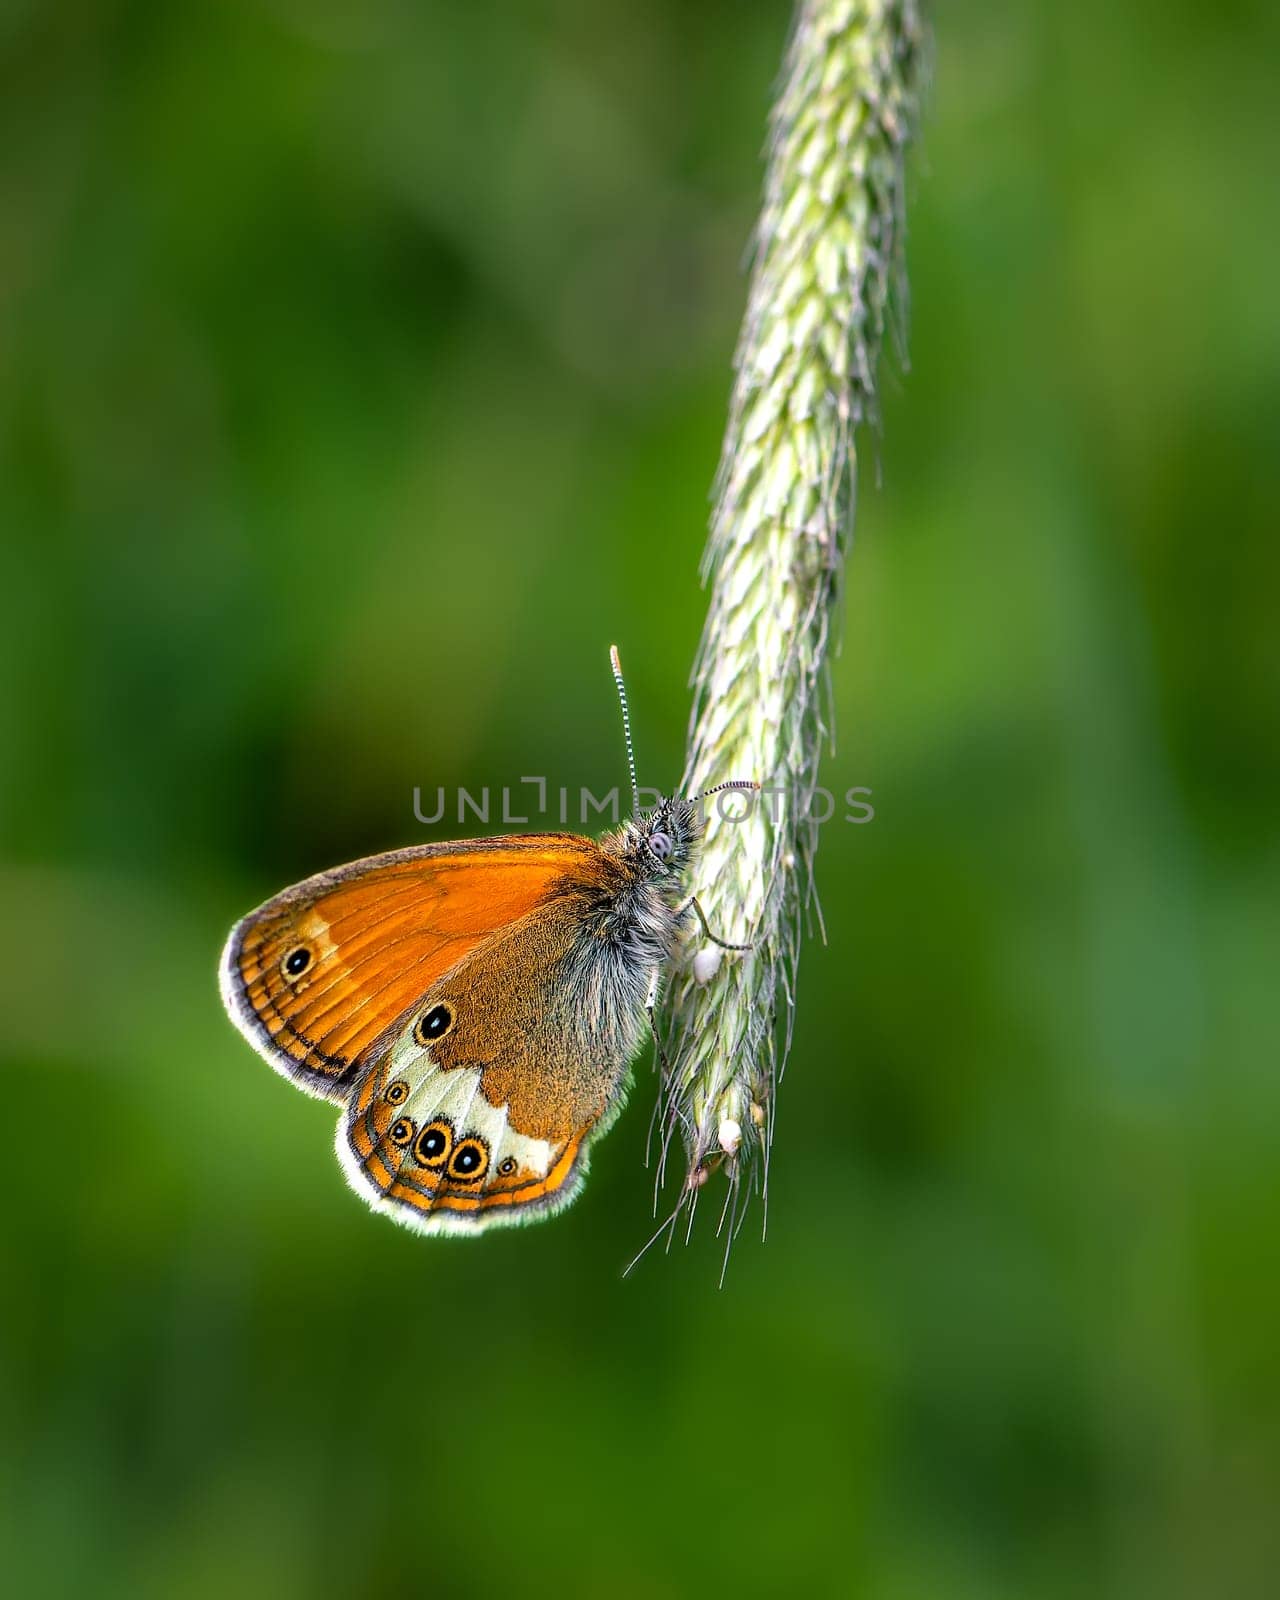 Brown butterfly on green blurred background by Millenn